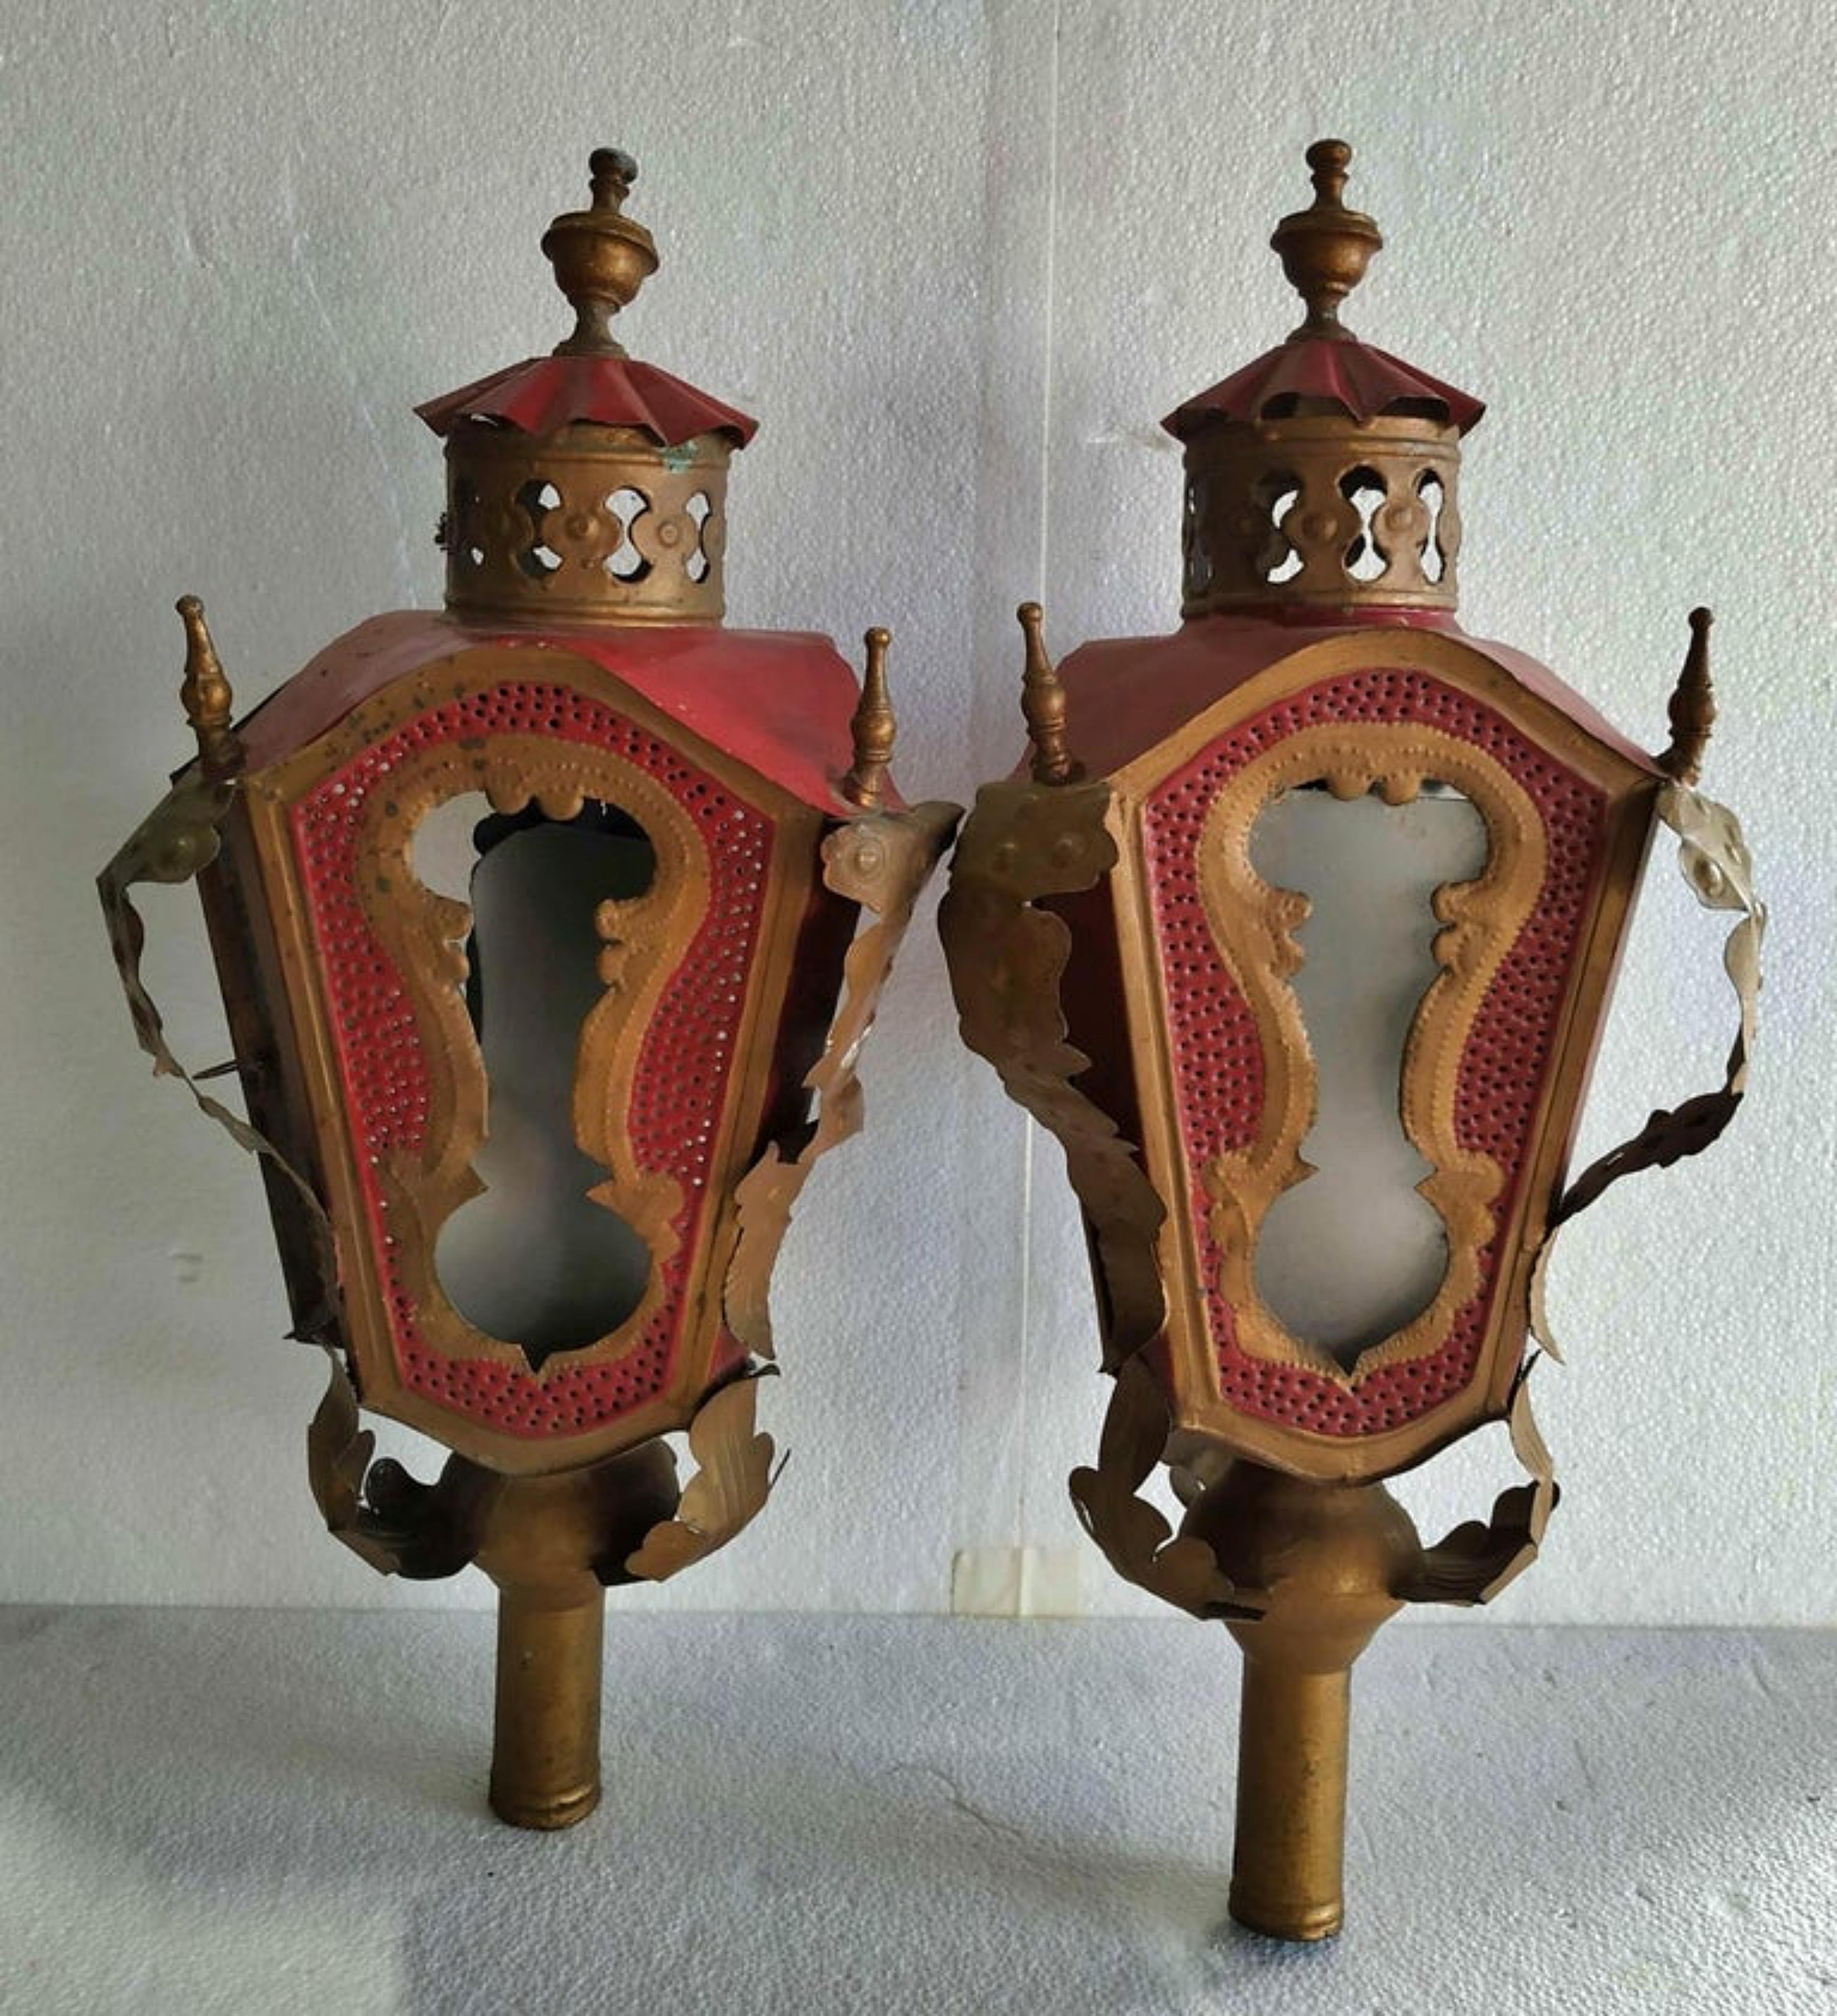 PAIR OF PORTUGUESE LANTERNS 18th Century

in painted and gilded metal, glass sides.
Height: 57 cm.
good conditions